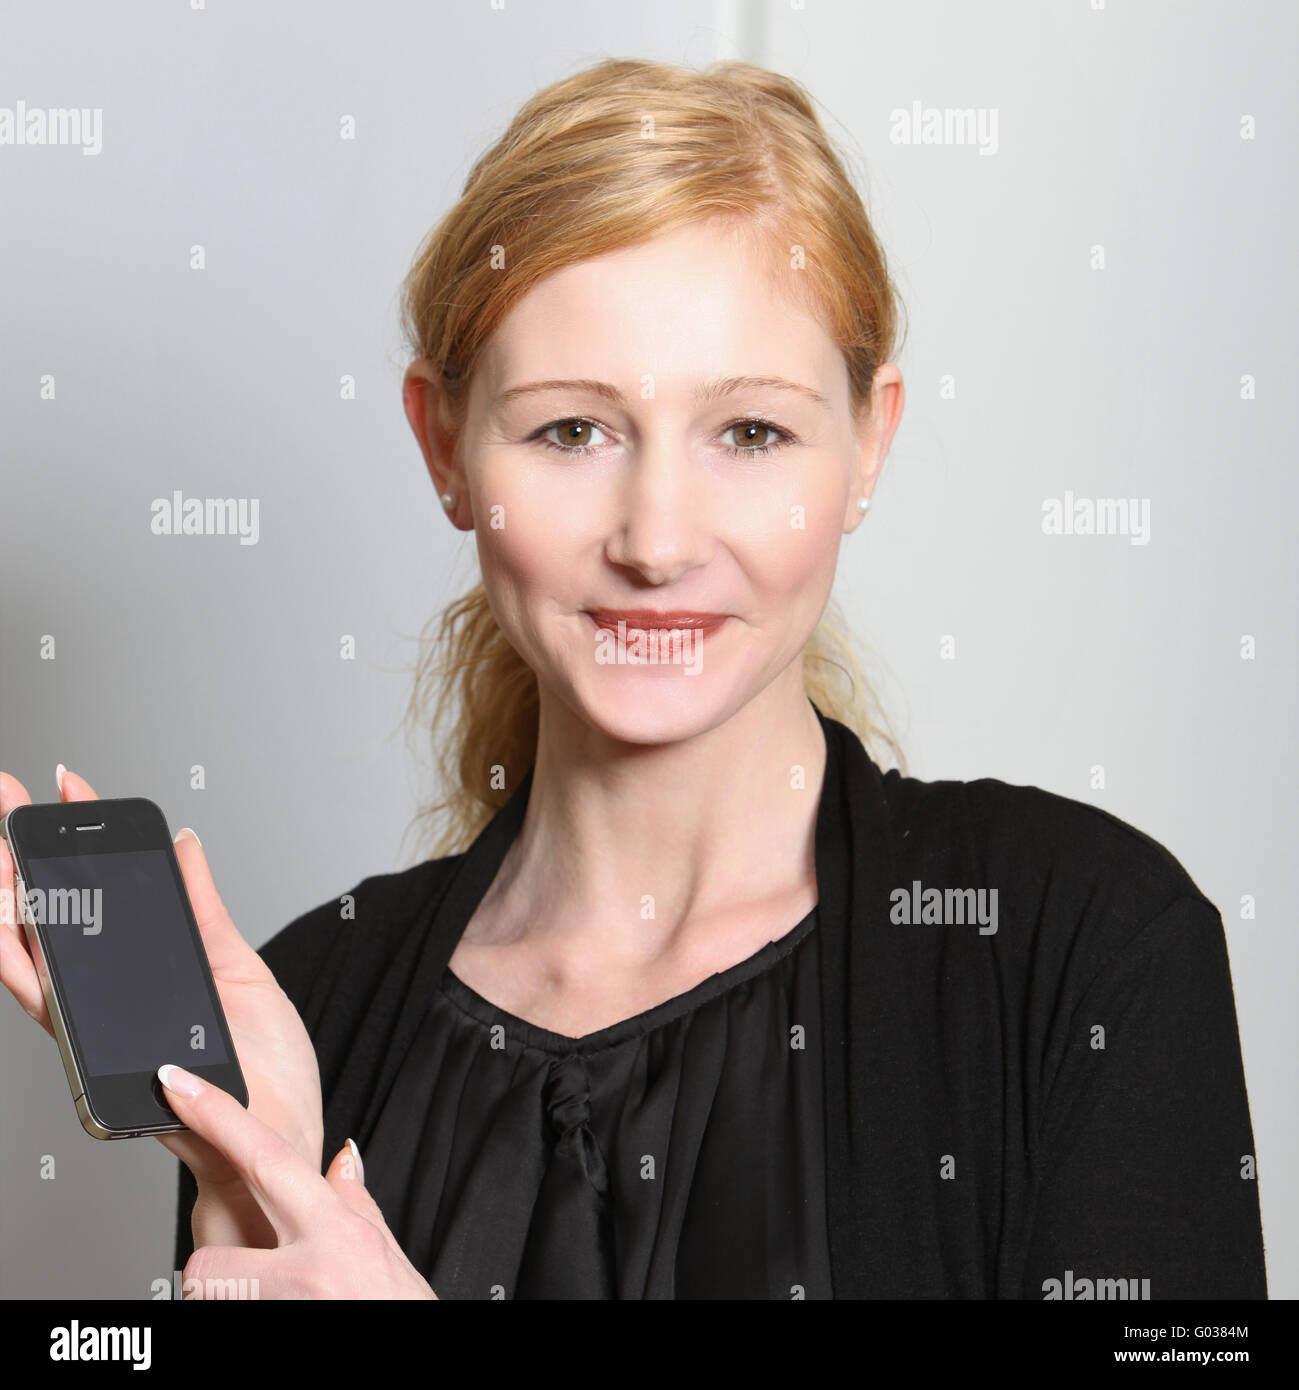 Young, smiling woman presented their smartphone Stock Photo